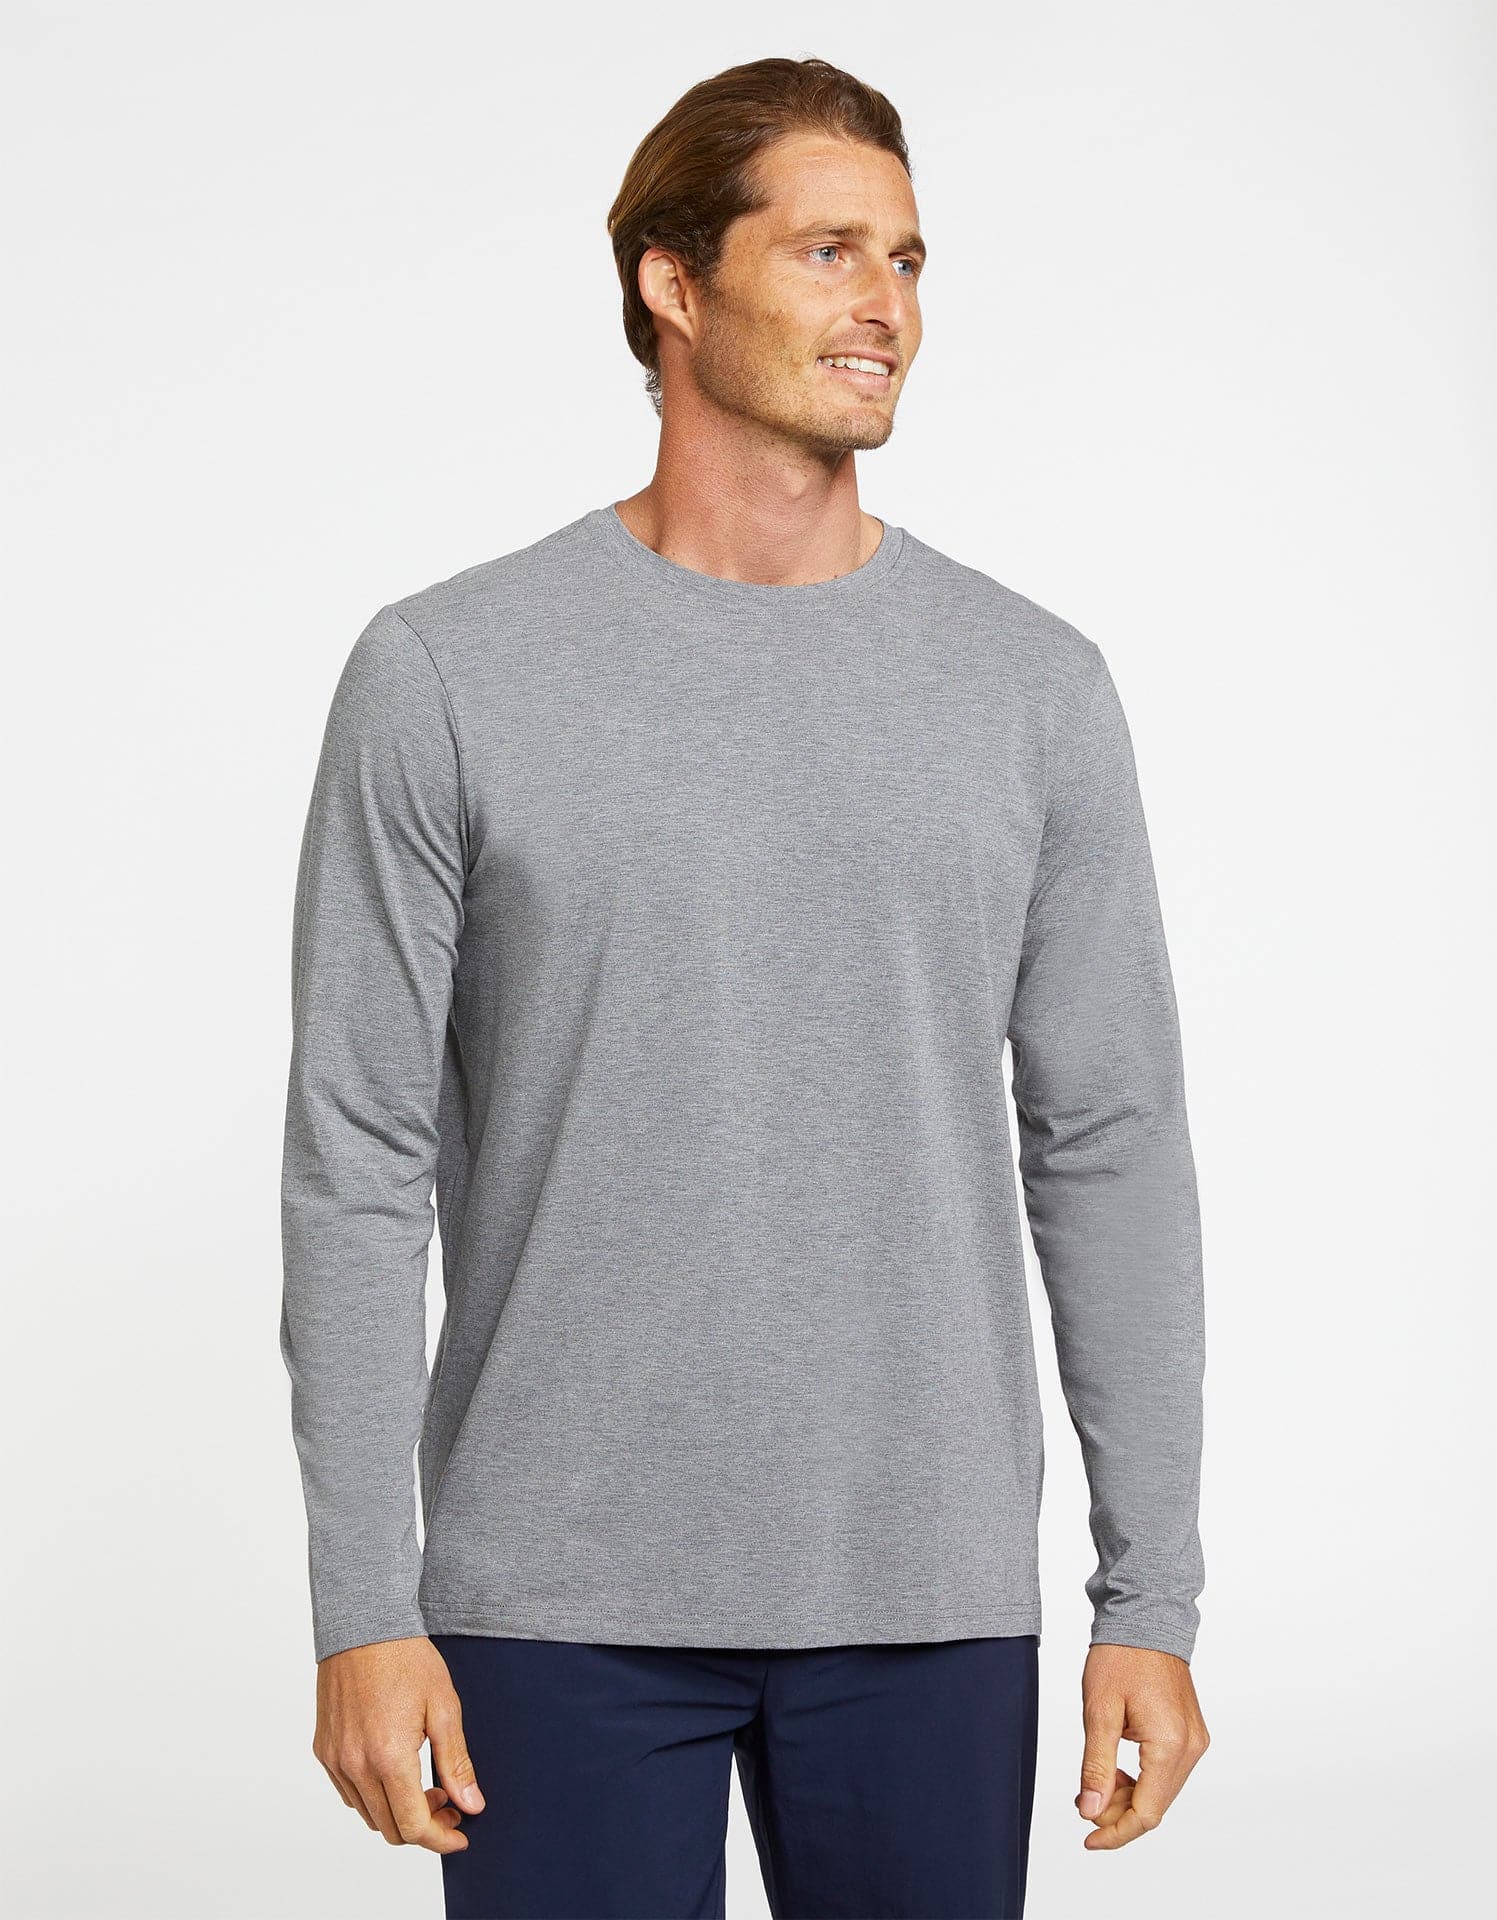 Sun Protective Long Sleeve T-Shirt For Men | Upf 50+ Sun Protection Steel Blue